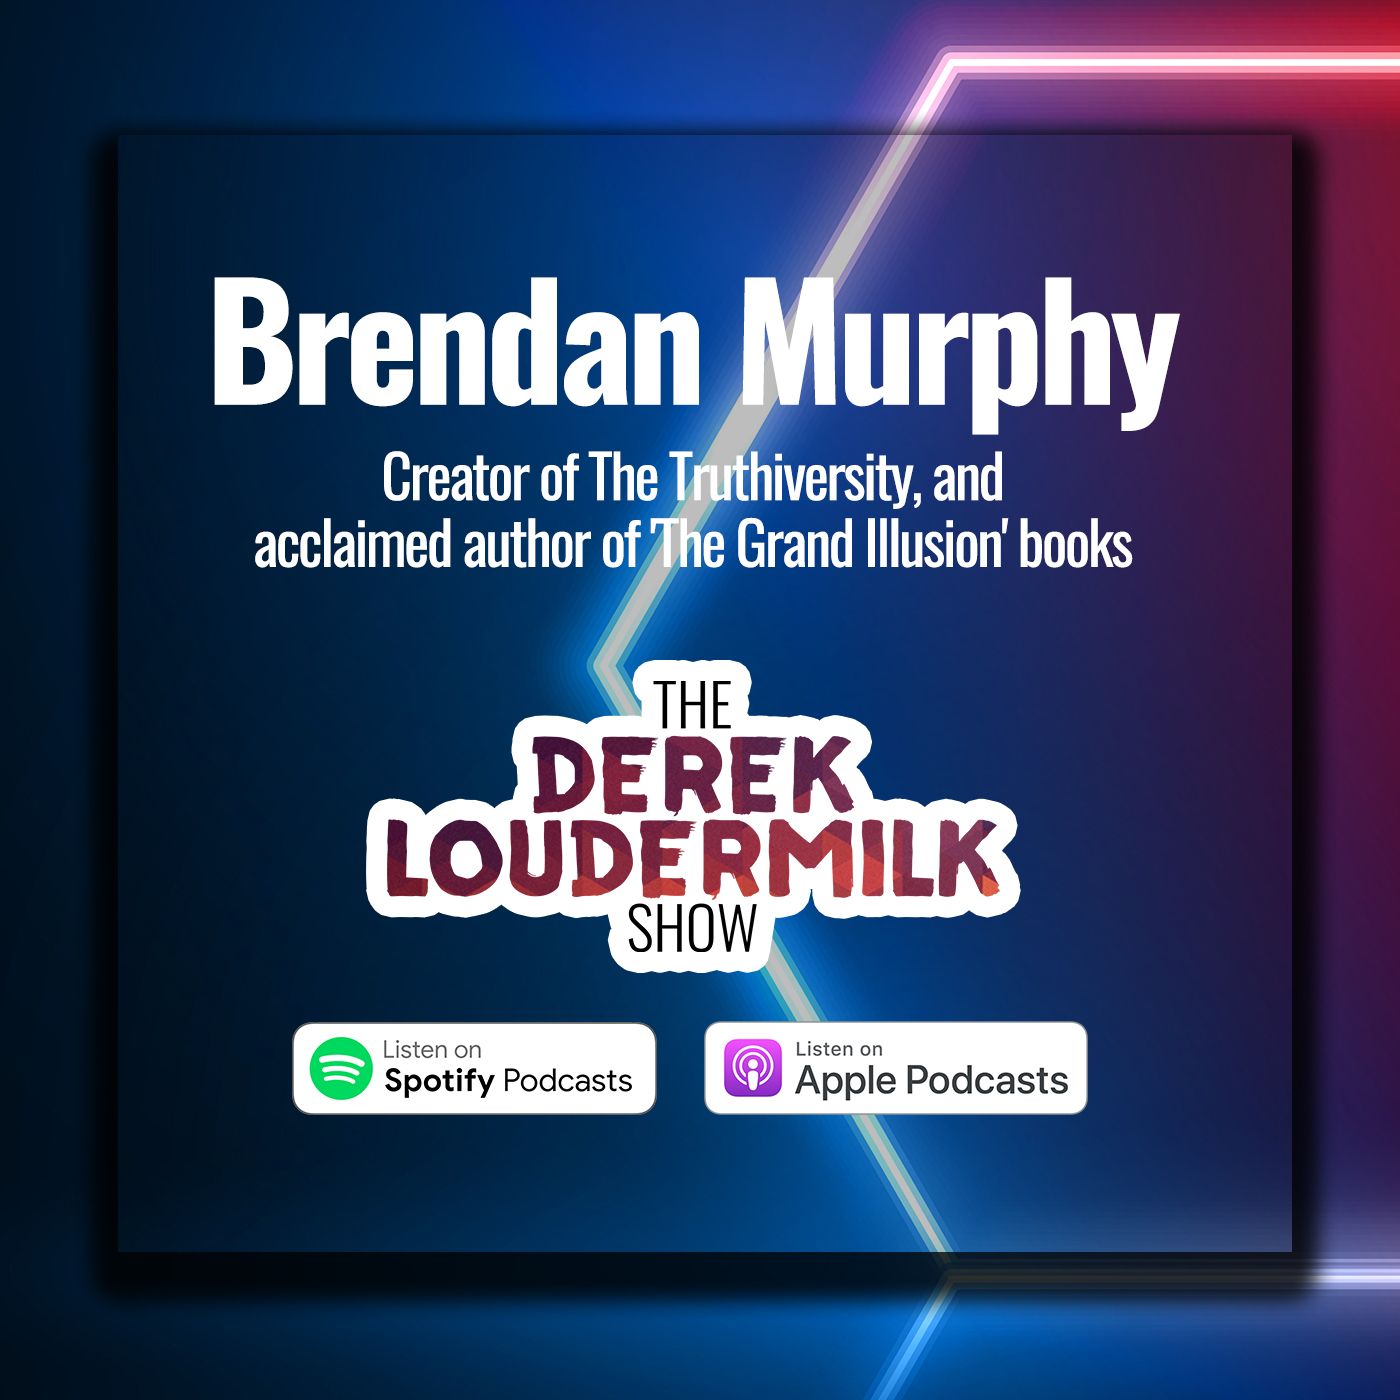 Brendan D. Murphy | The Grand Illusion, Library of Alexandria, The "Planning Center", and more...